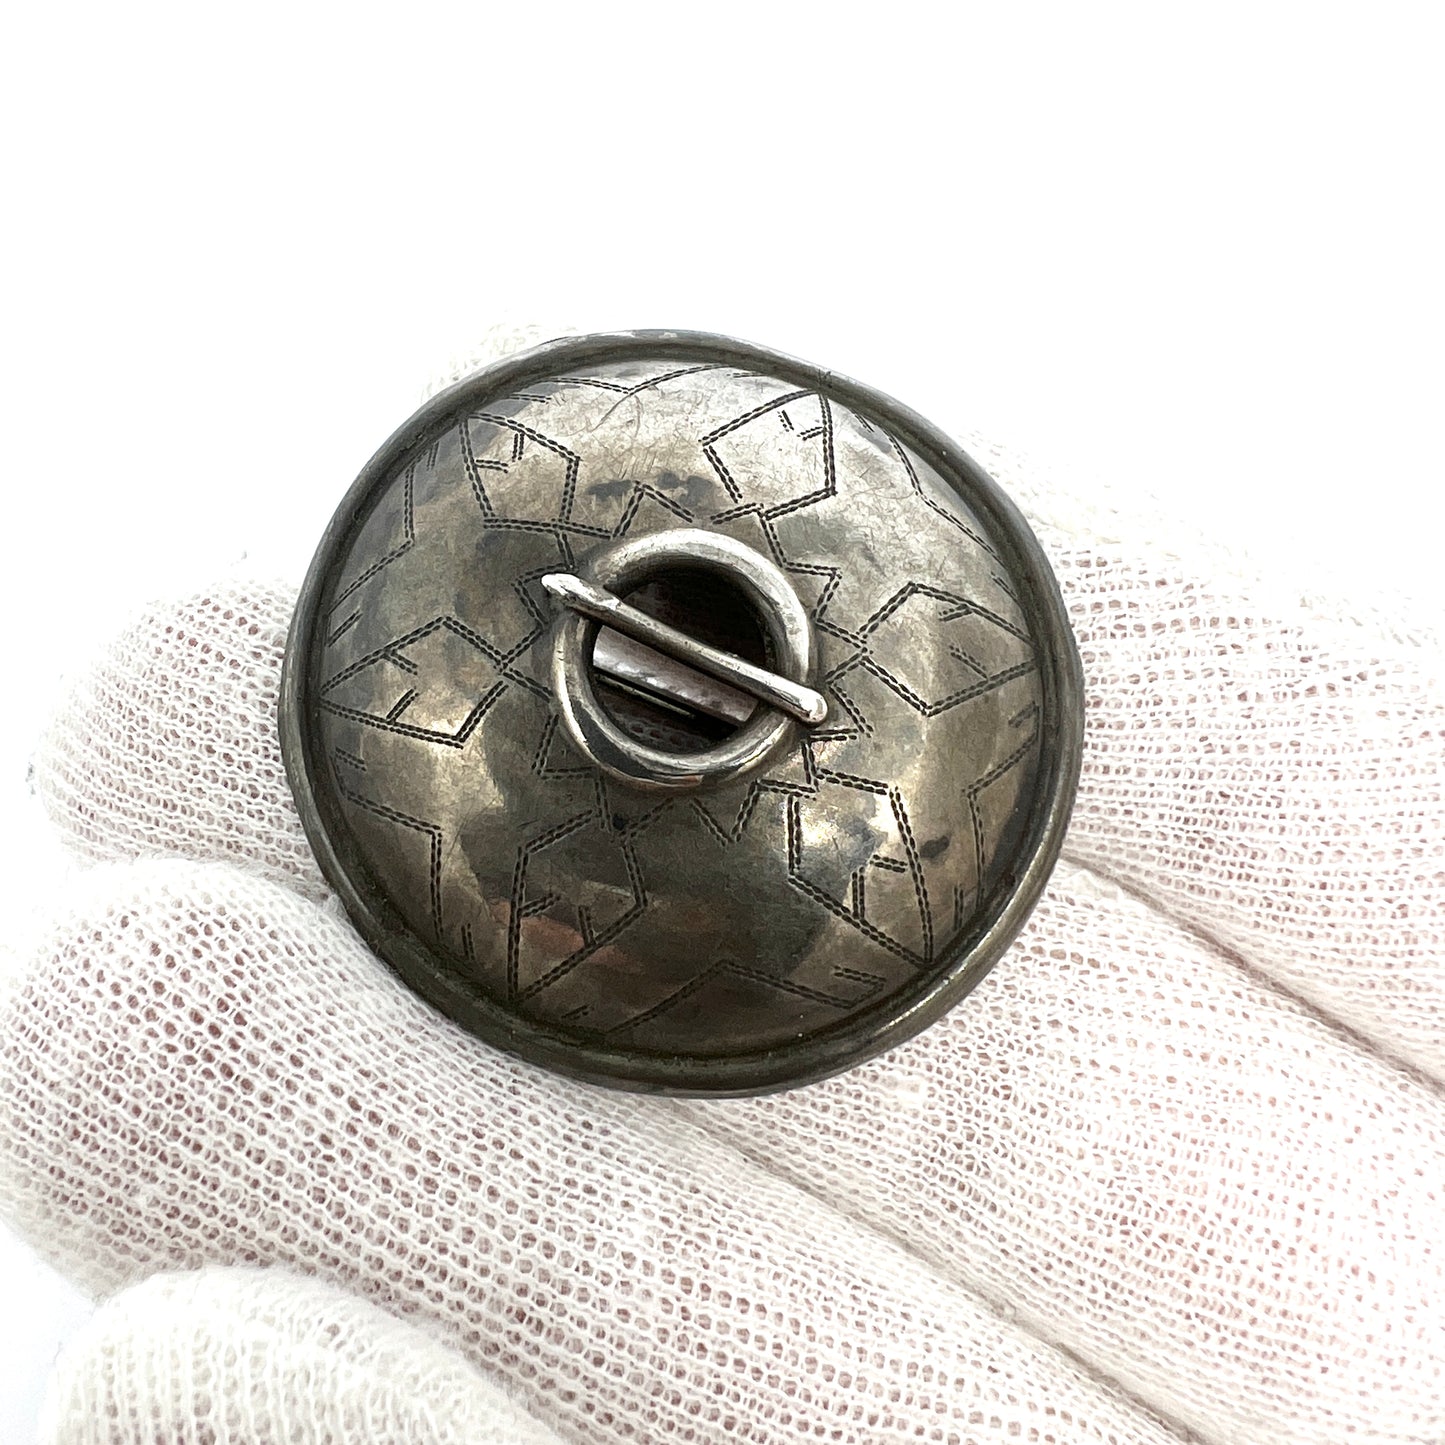 Kaarle August Wahlroos, Finland 1928. Traditional Solid Silver Shield Brooch.